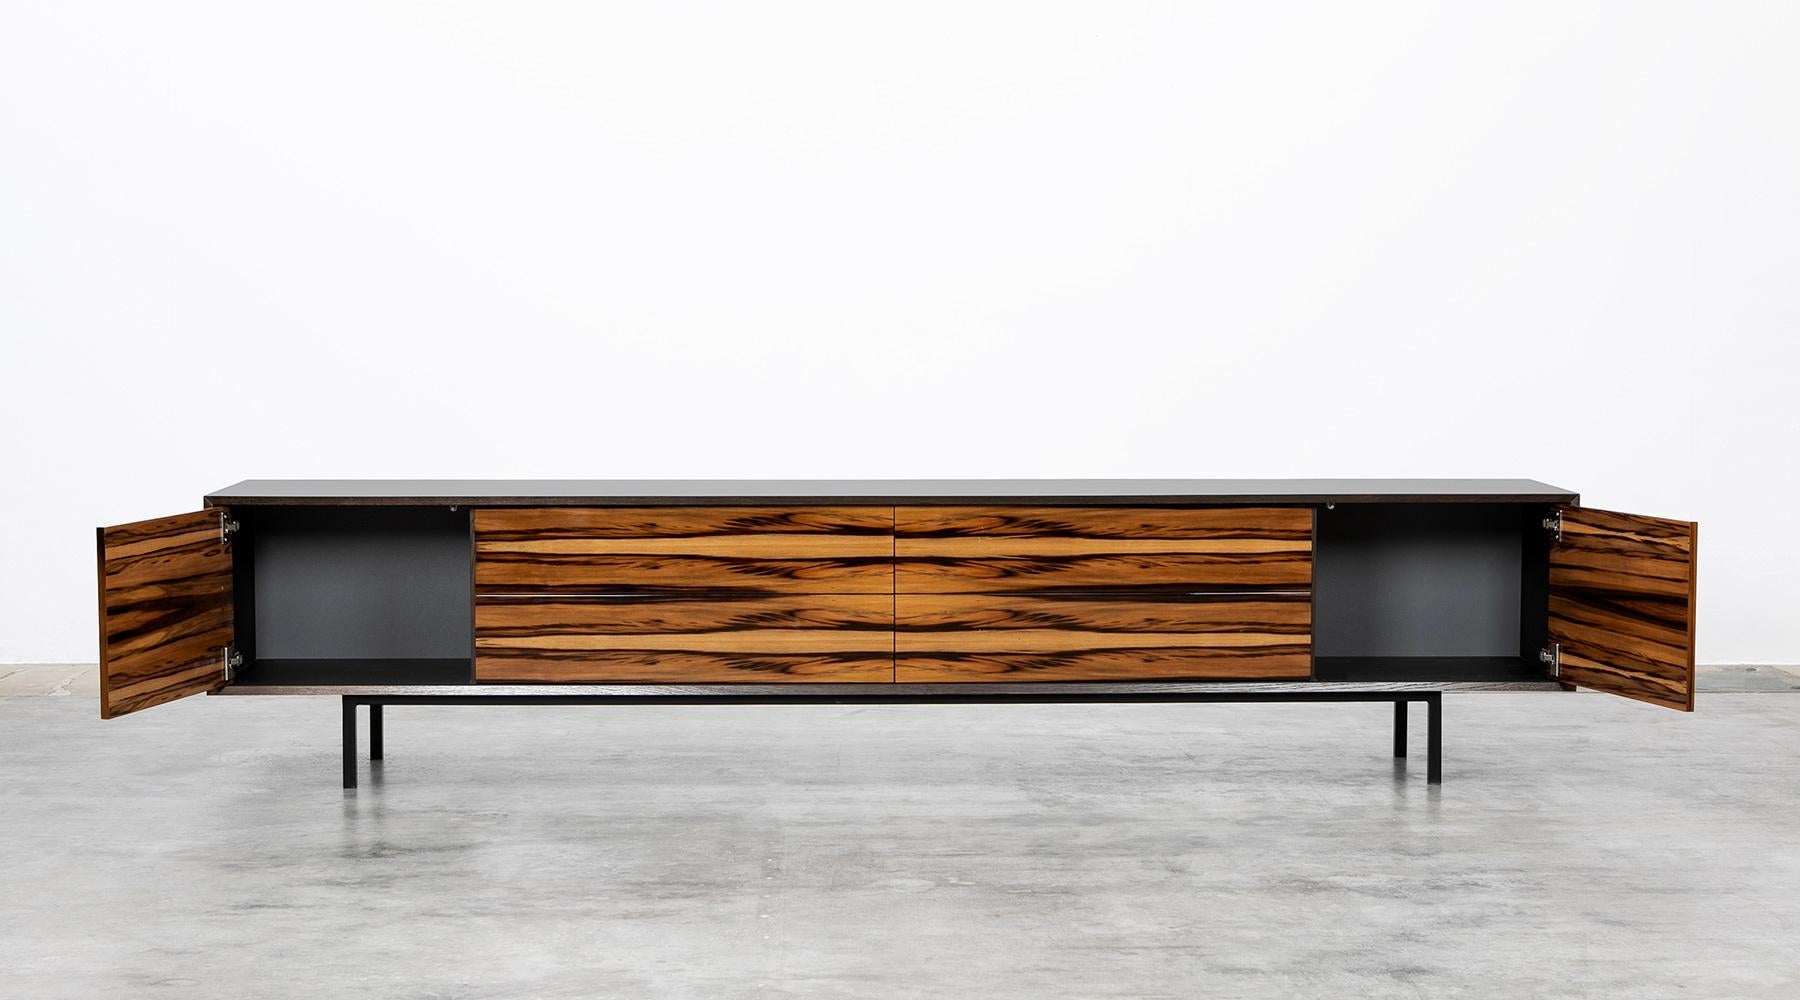 Sideboard by contemporary German artist Johannes Hock. The front of the doors and drawer of this unique piece are made of high-quality satin nut, the corpus is in black HPL on black metal legs. Manufactured by Atelier Johannes Hock.

Hock refined